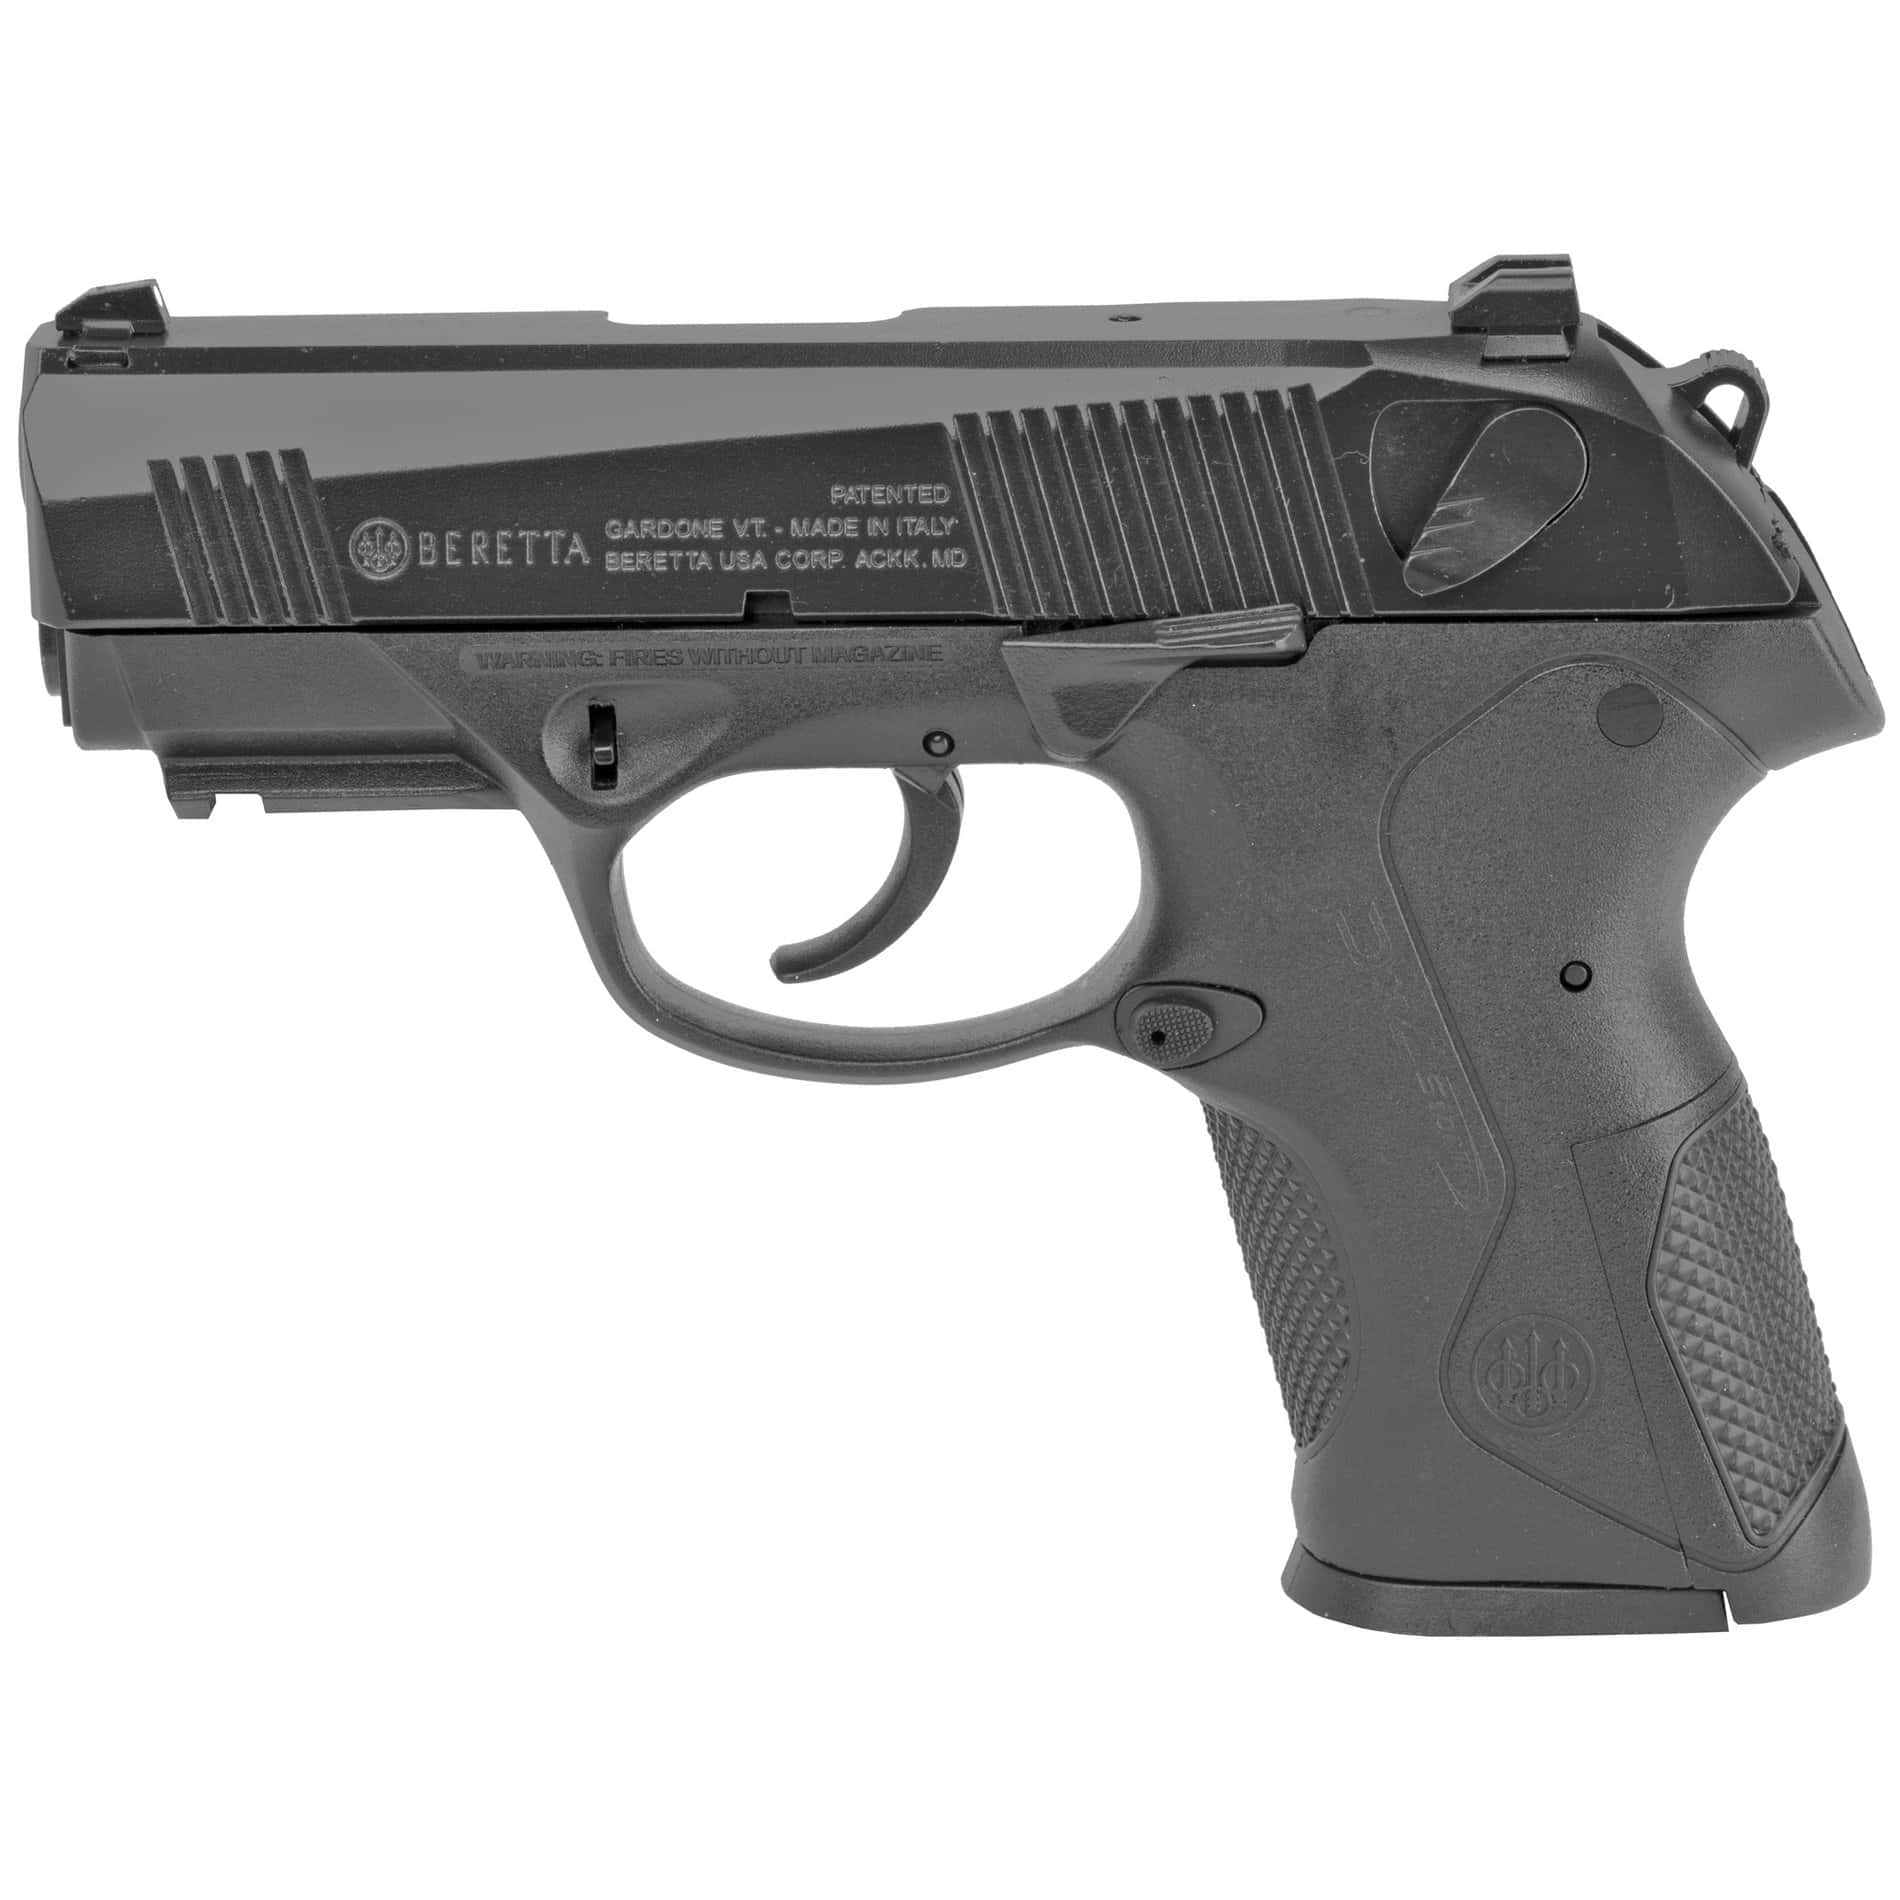 PX4 STORM COMPACT